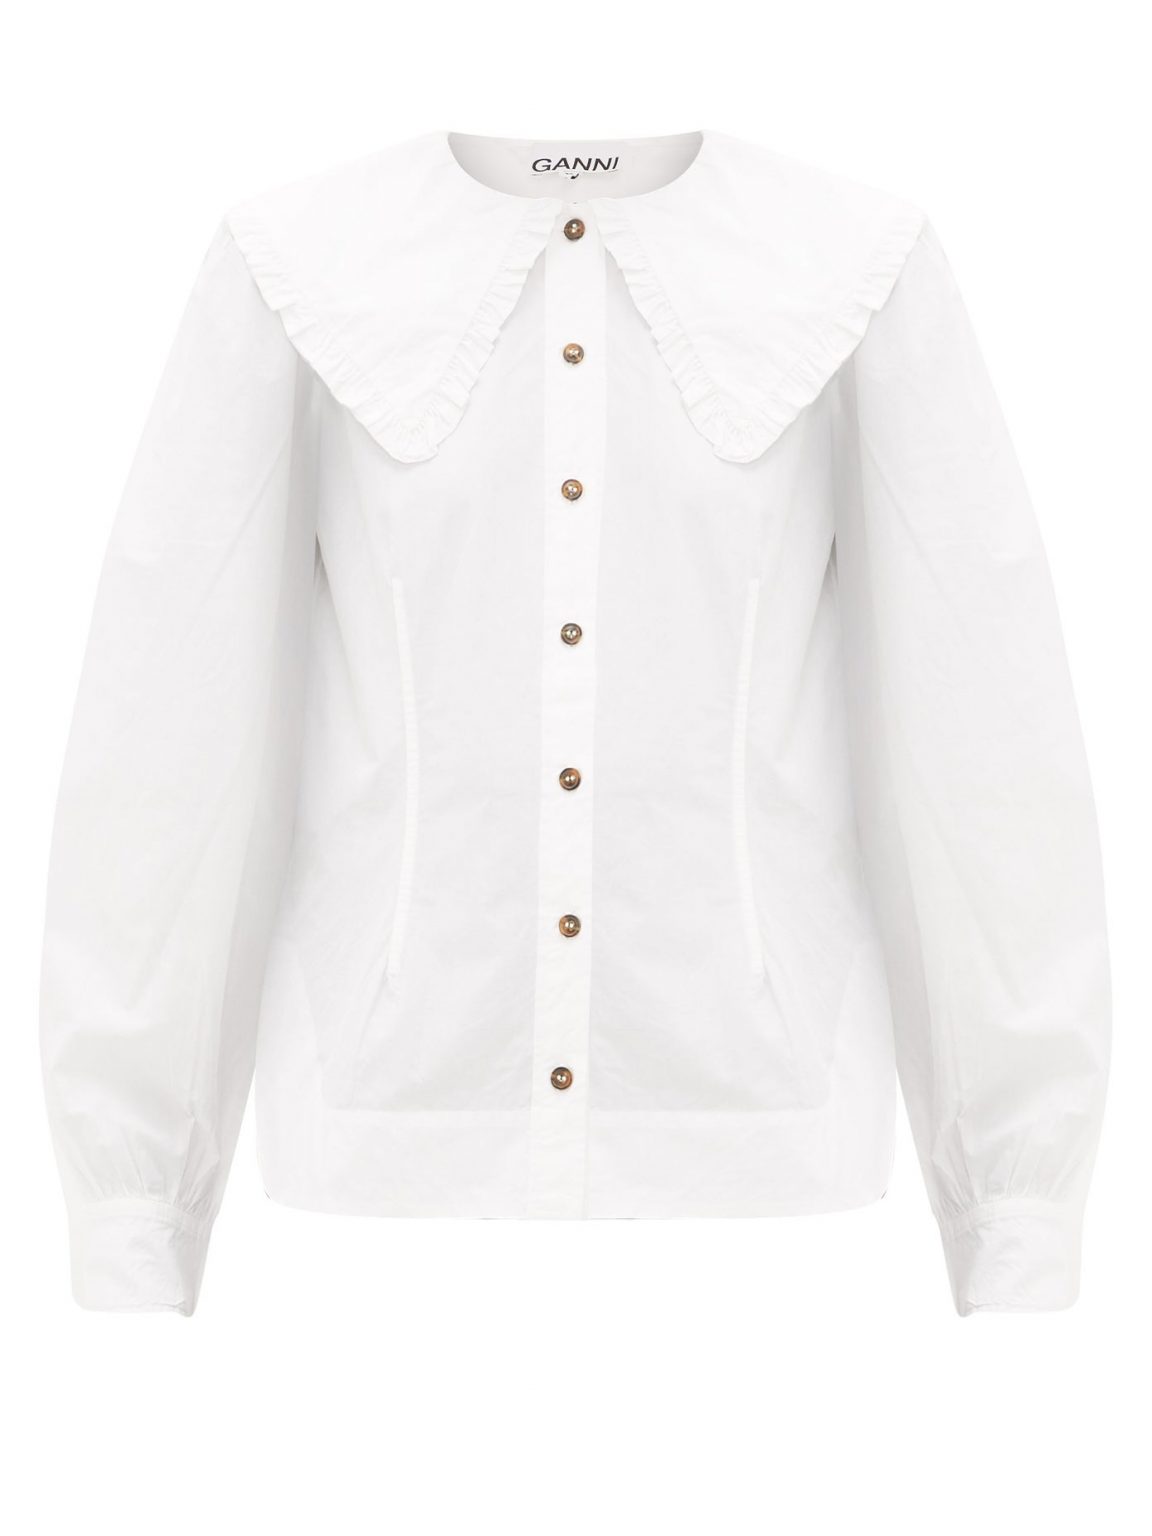 Oversized Collar Shirts Are Taking Over Spring/Summer - Outfitting Ideas